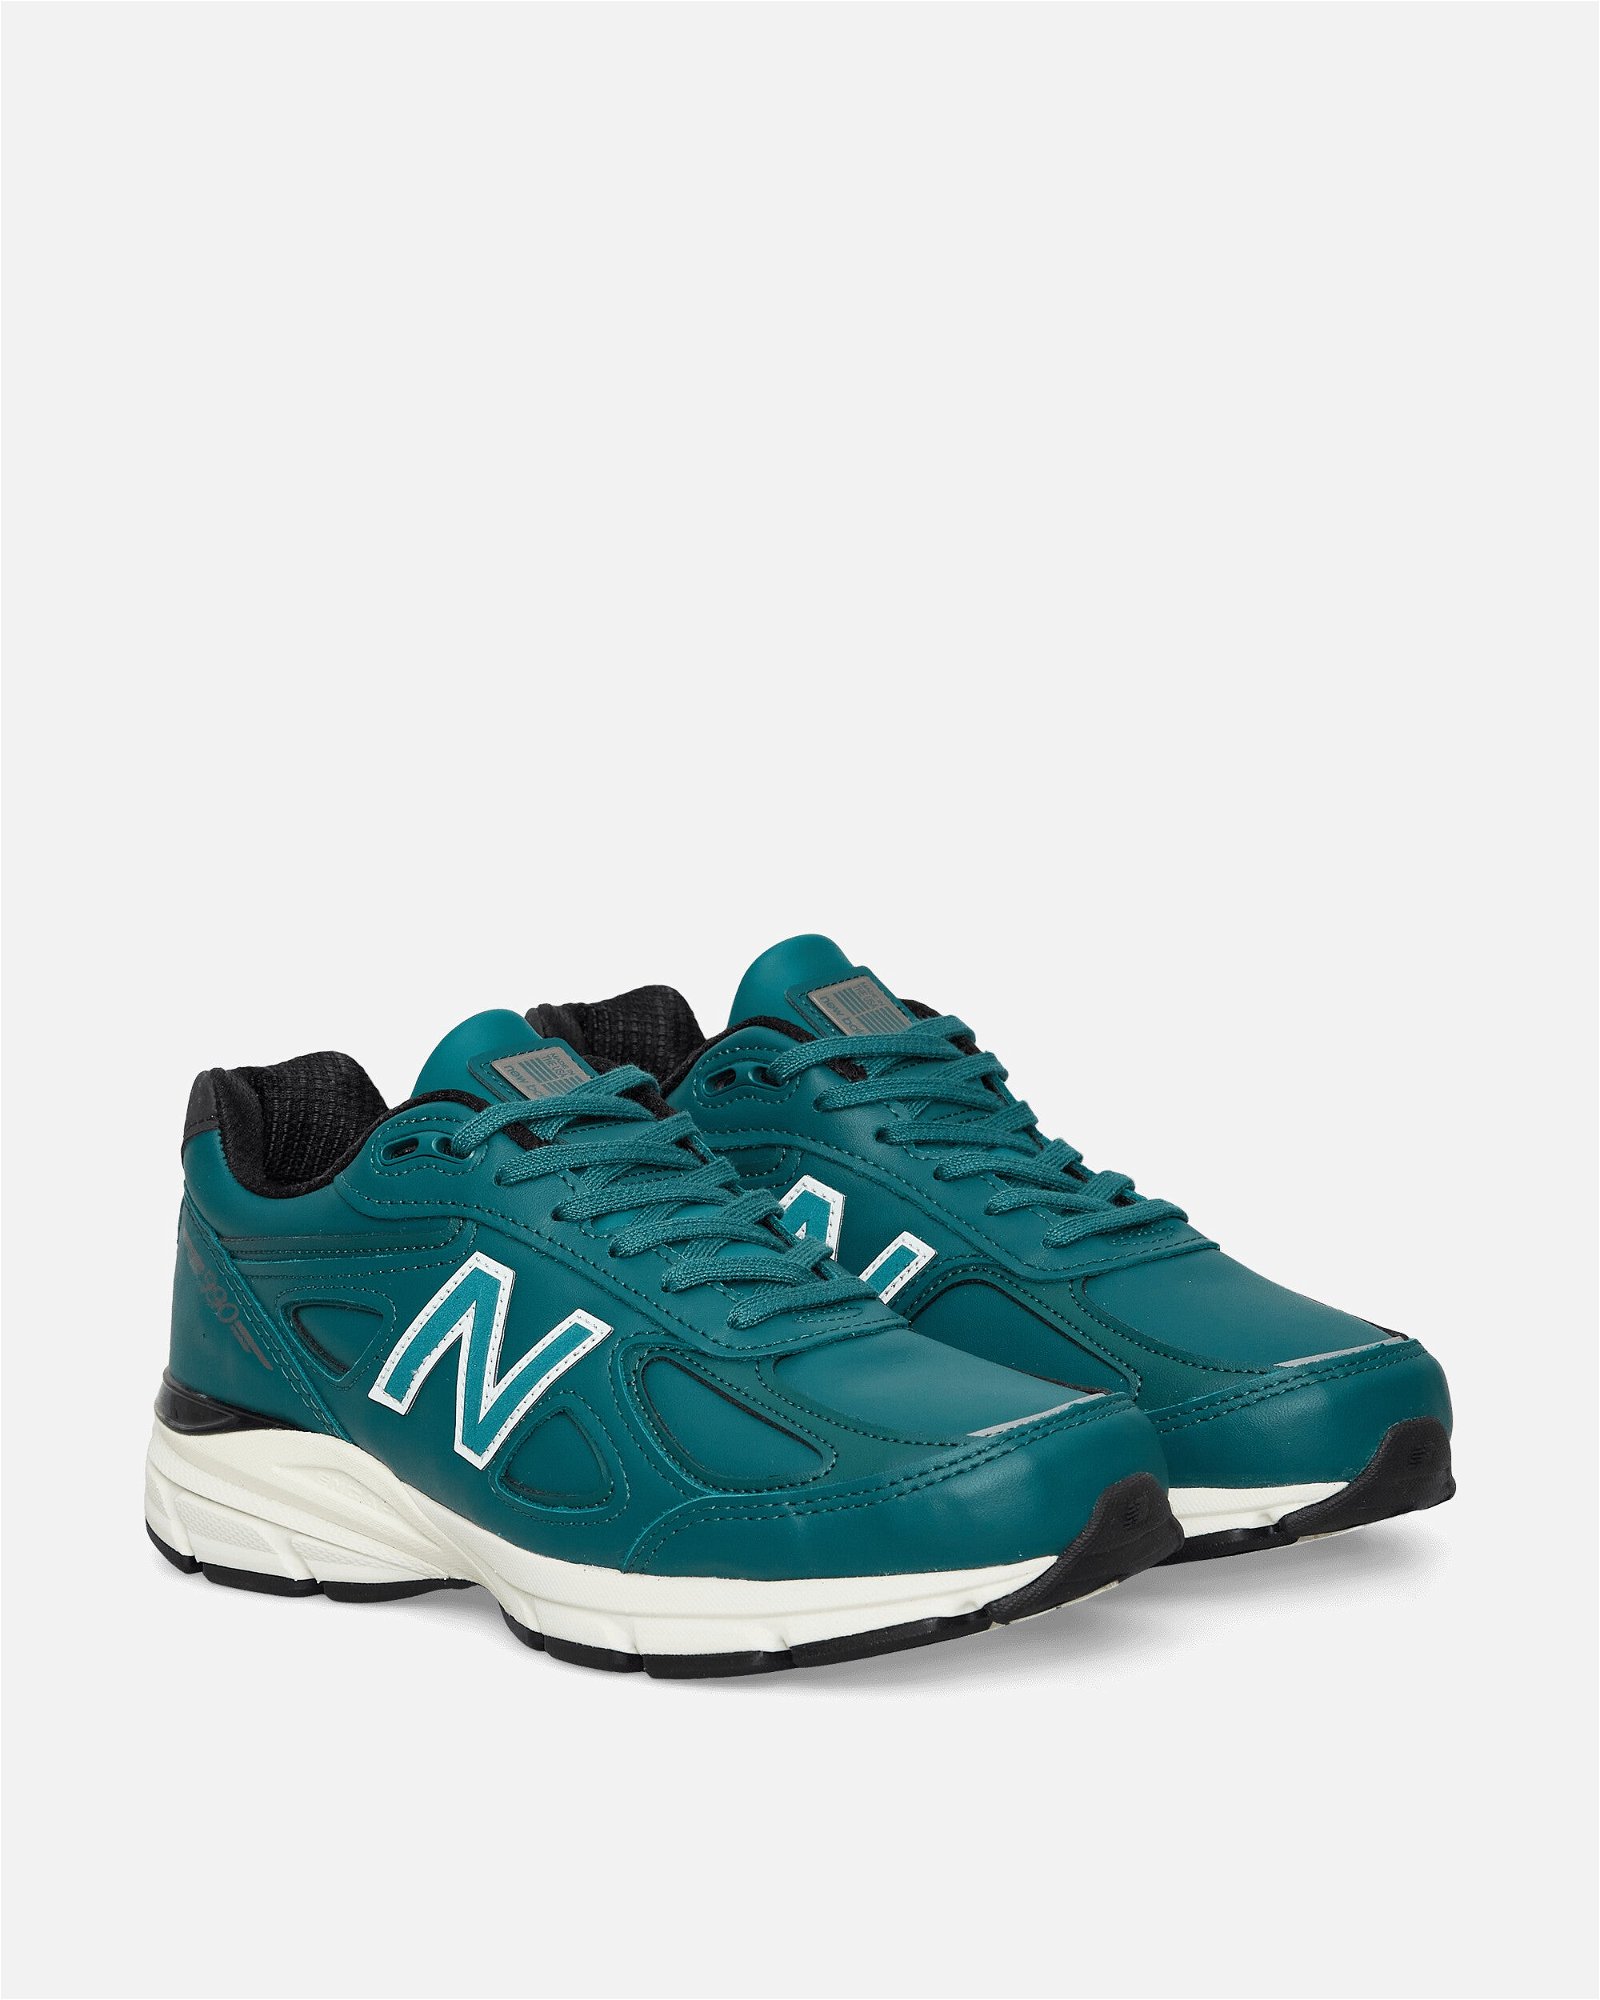 990v4 Made in USA "Teal"